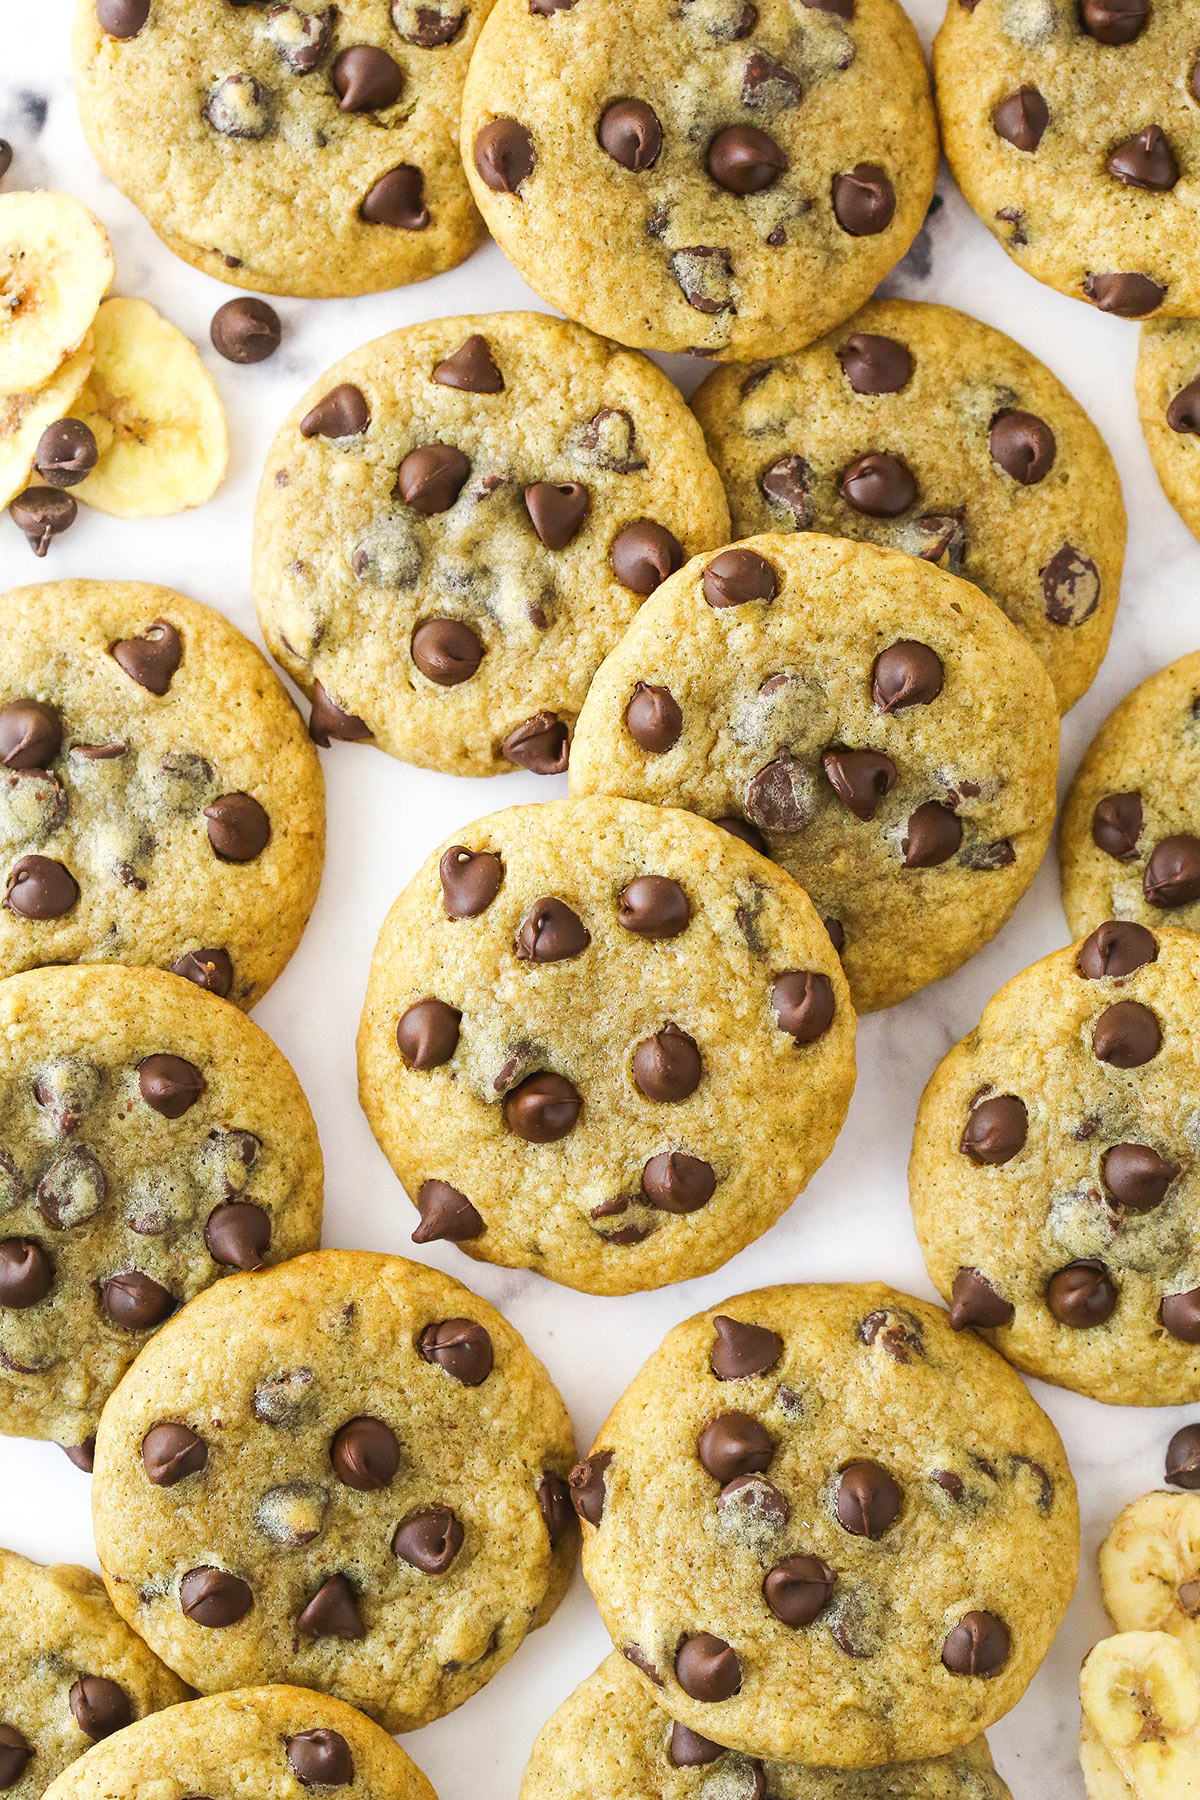 Overhead image of banana chocolate chip cookies scattered on a countertop.